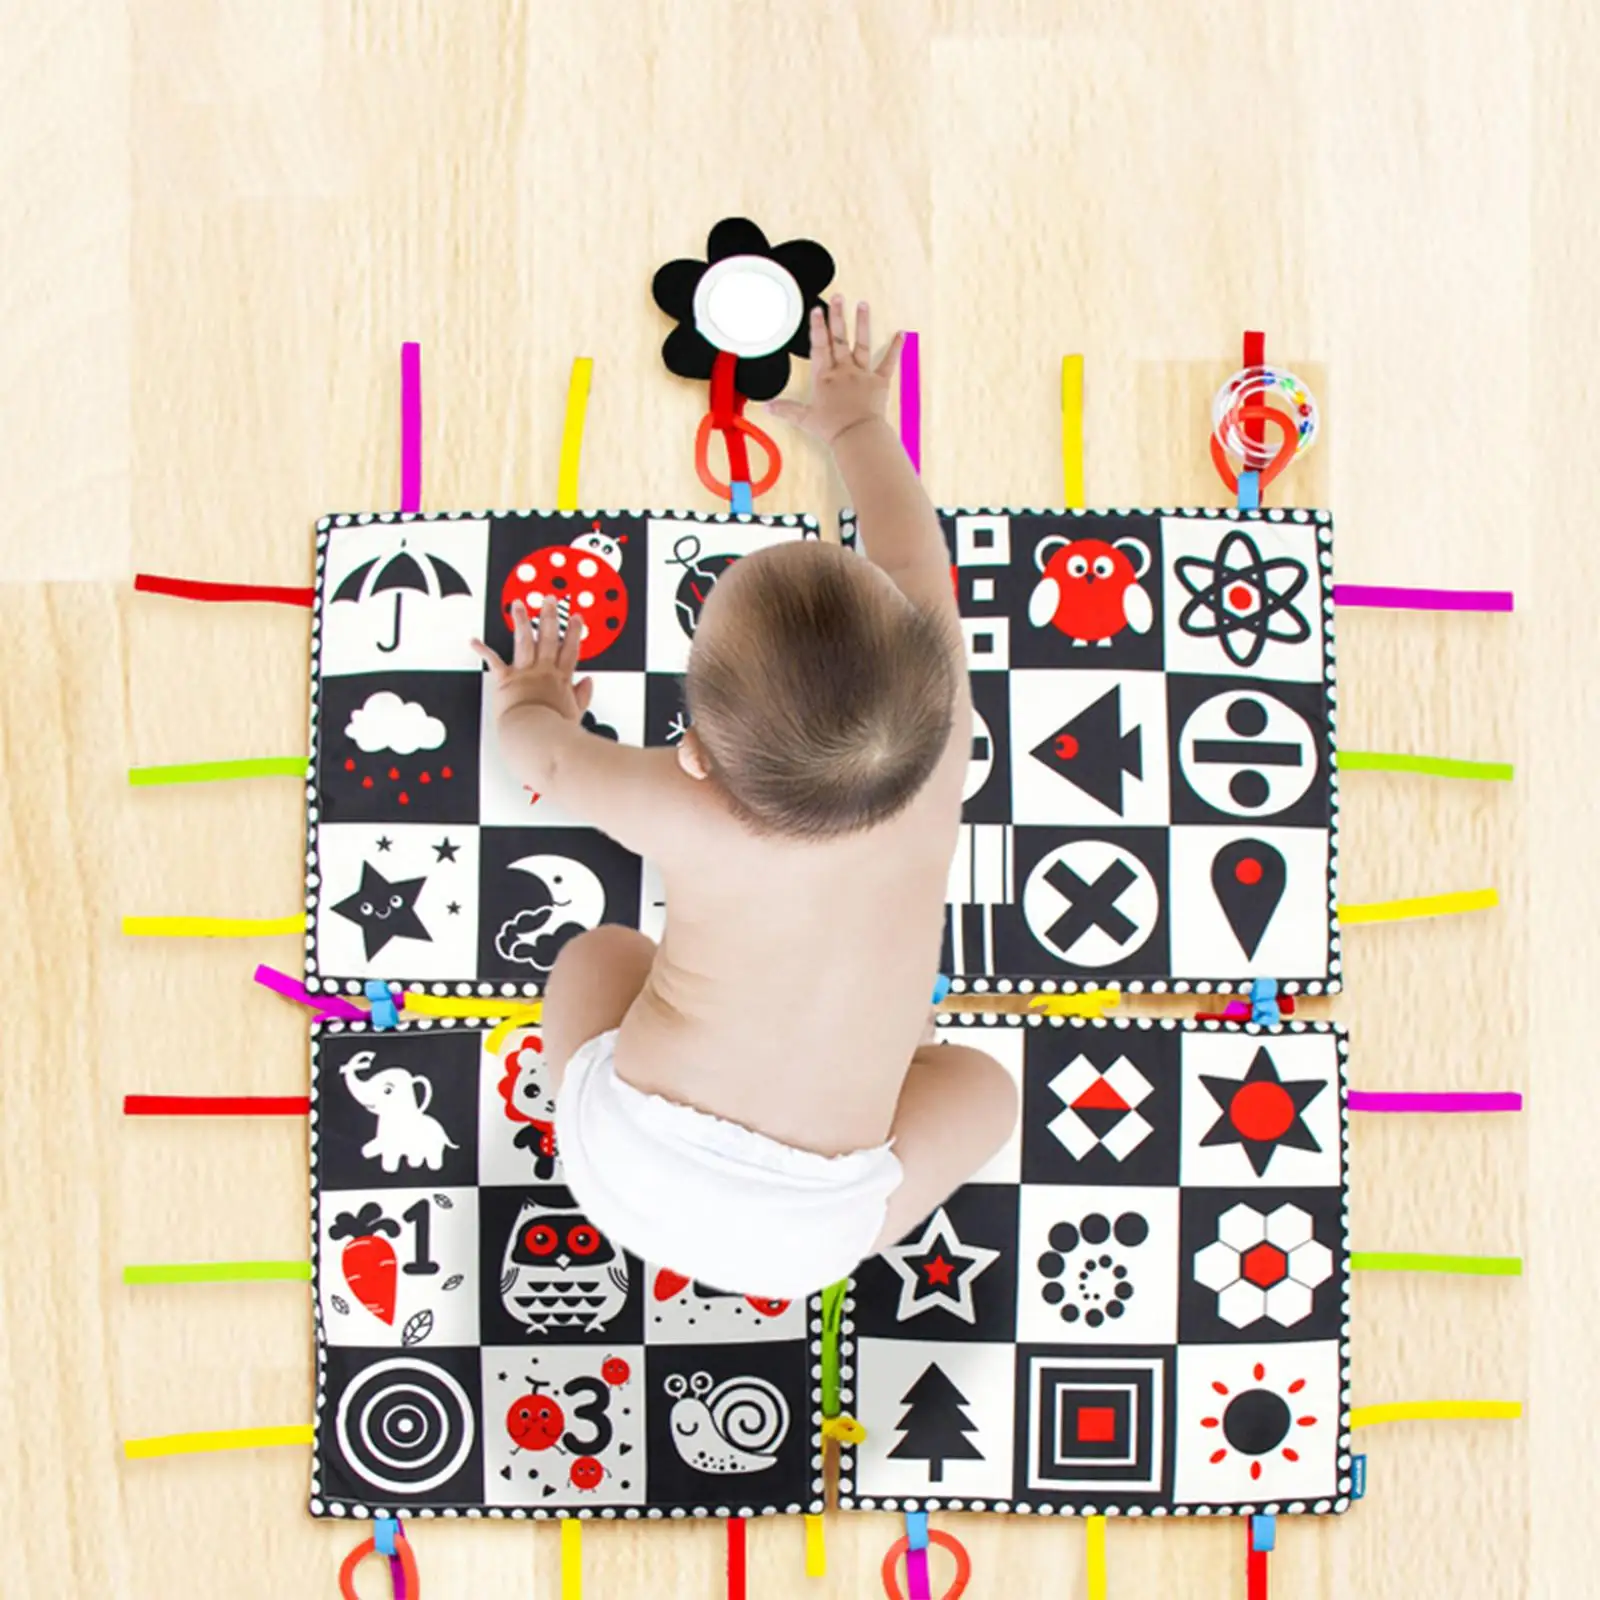 Baby Play Mat Educational Baby Game Pad Cushion for 0-6 Months Baby Newborn